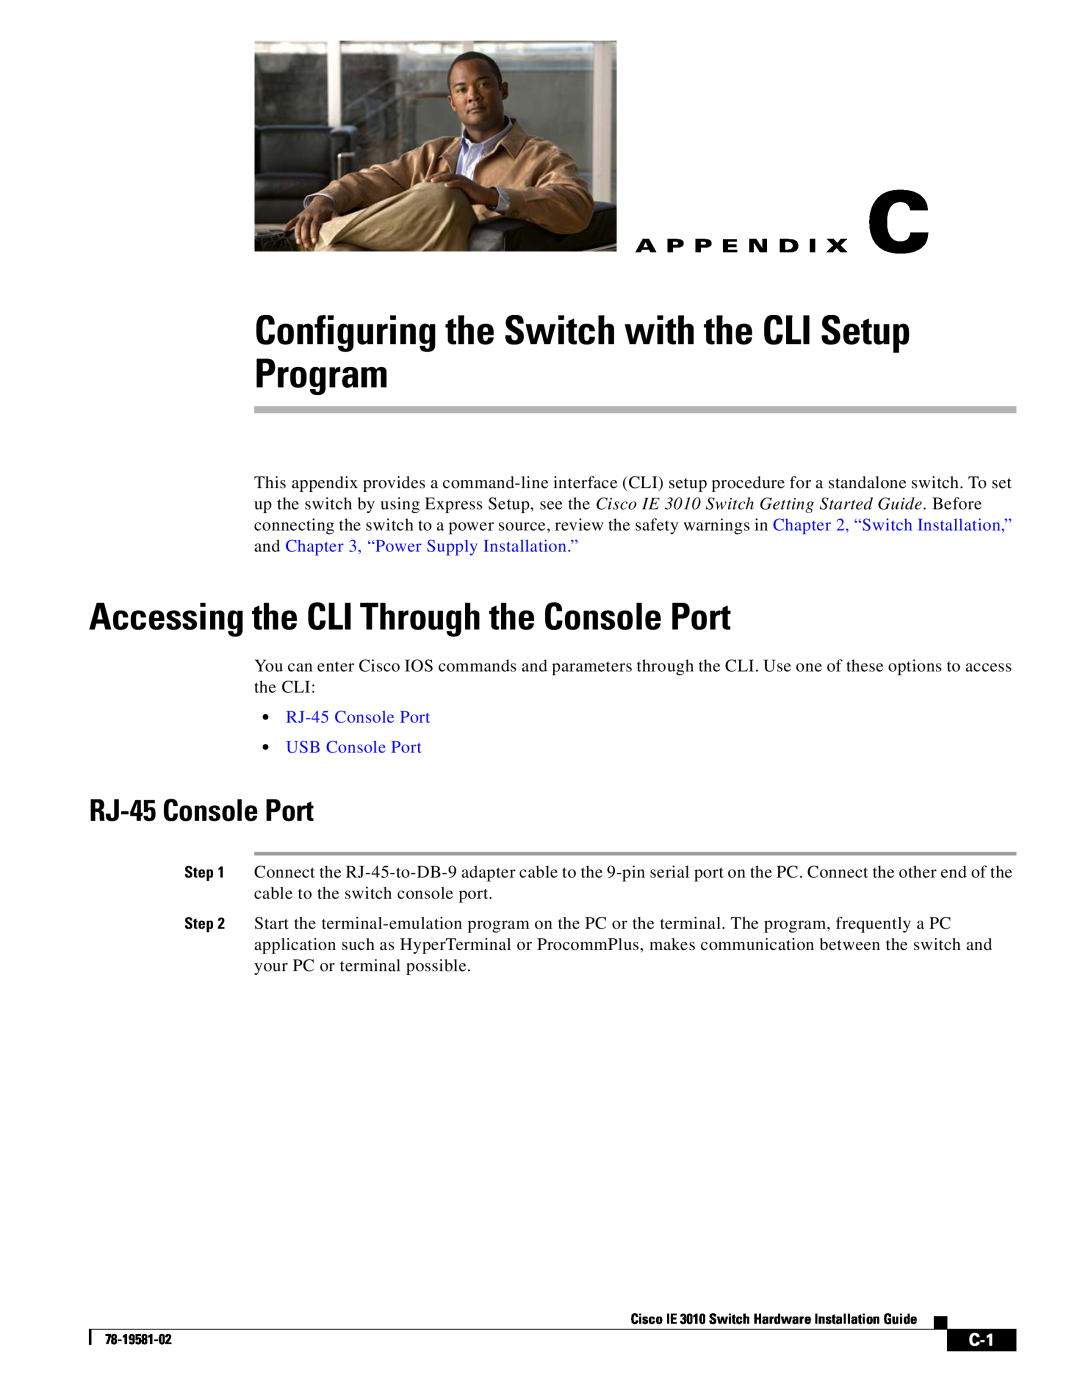 Cisco Systems IE3010 manual Configuring the Switch with the CLI Setup Program, Accessing the CLI Through the Console Port 